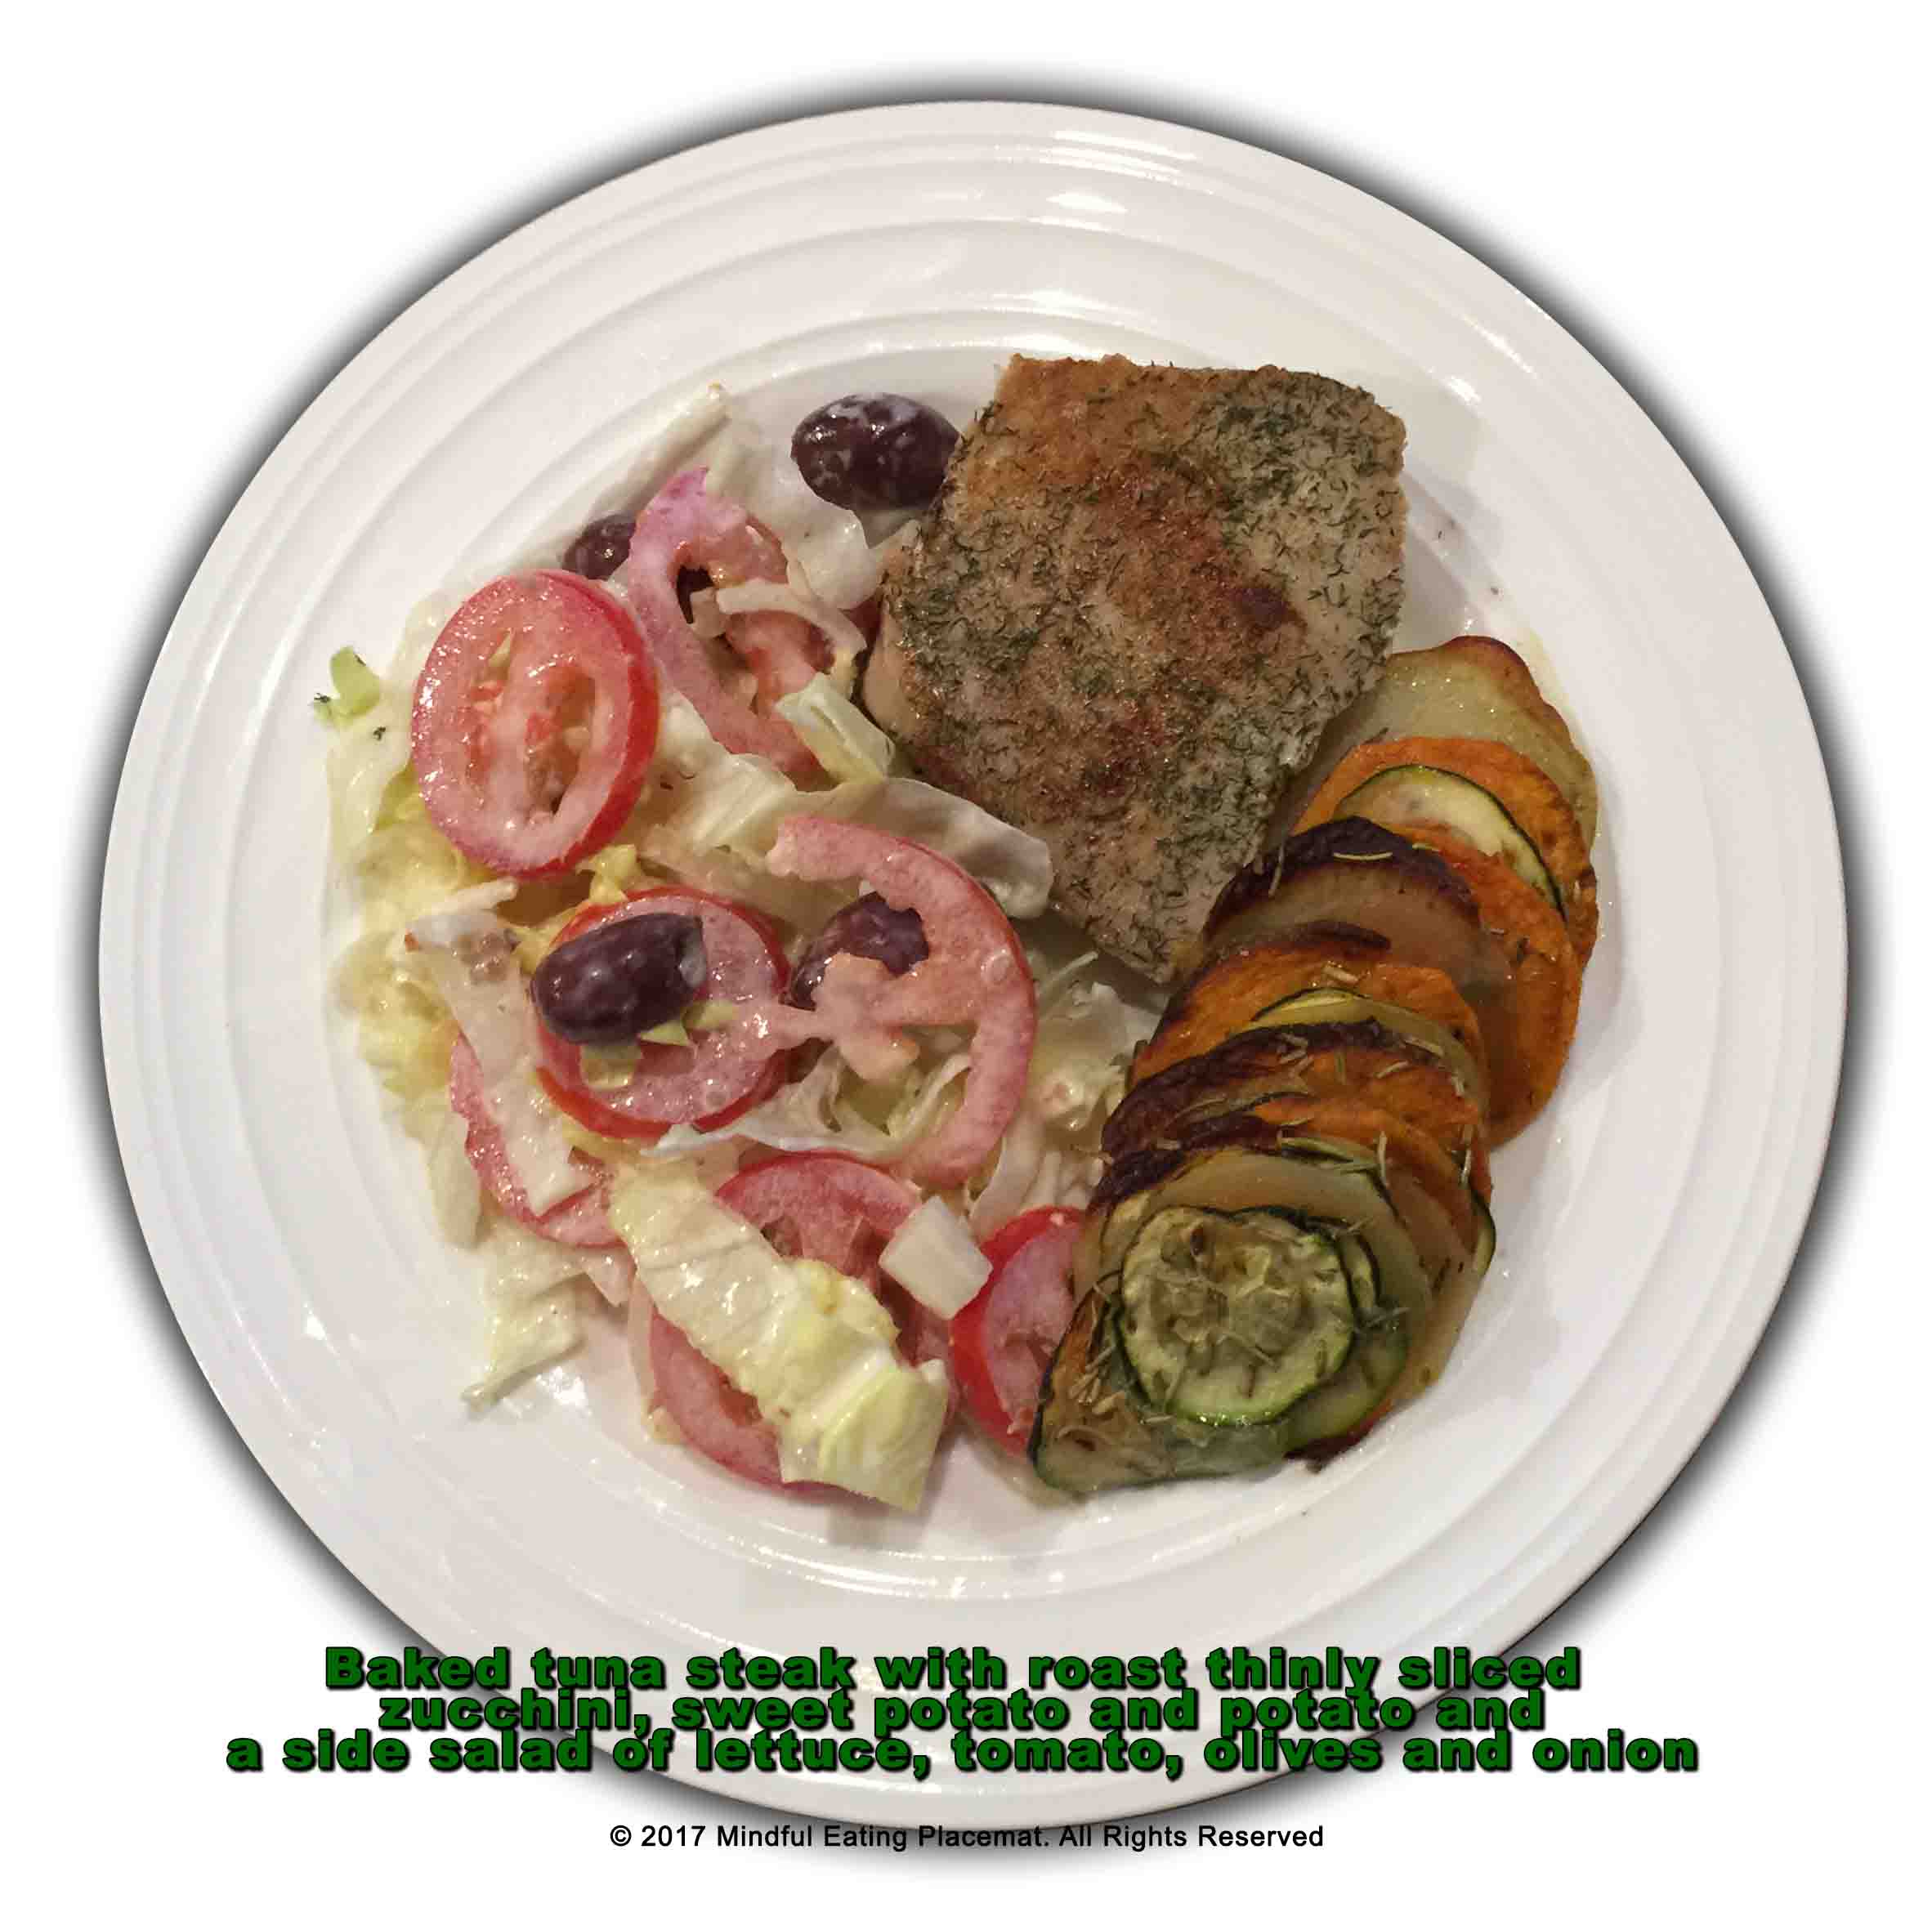 Tuna steak with thin roasted vegetables and tomato, lettuce, onion and olive salad